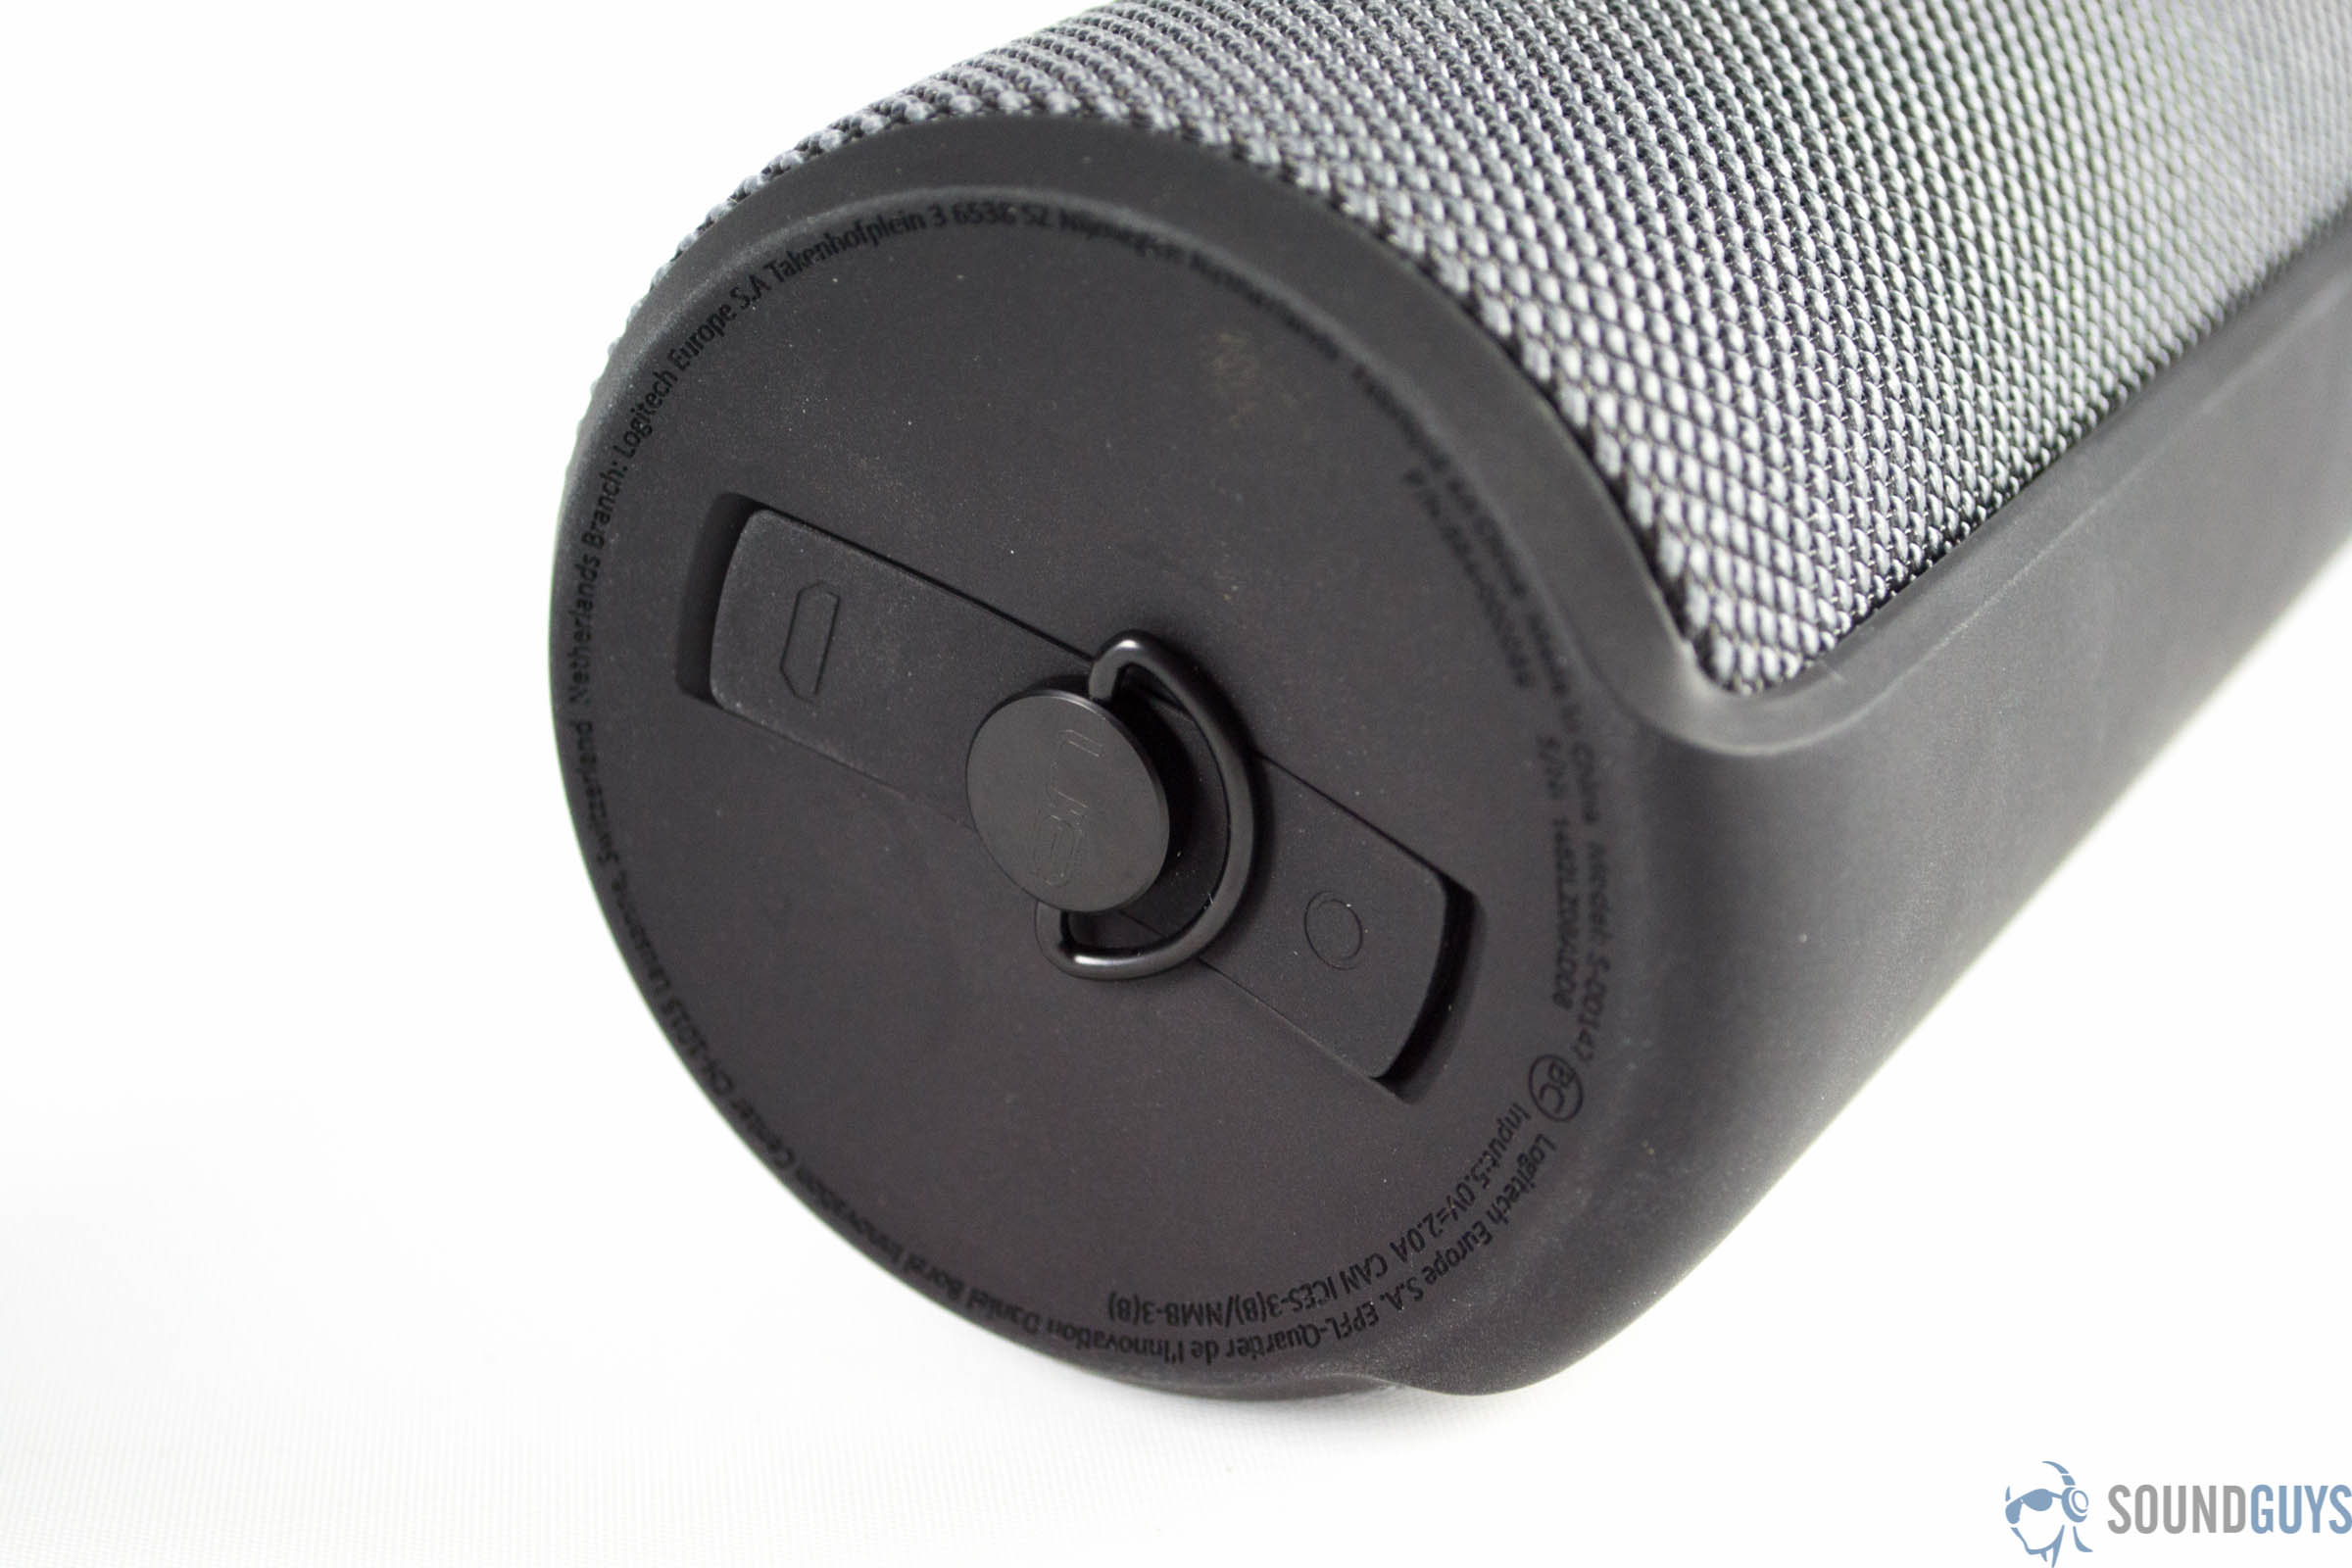 A picture of the UE Megaboom 3 Bluetooth speaker carry clip on the bottom of the cylinder shape.